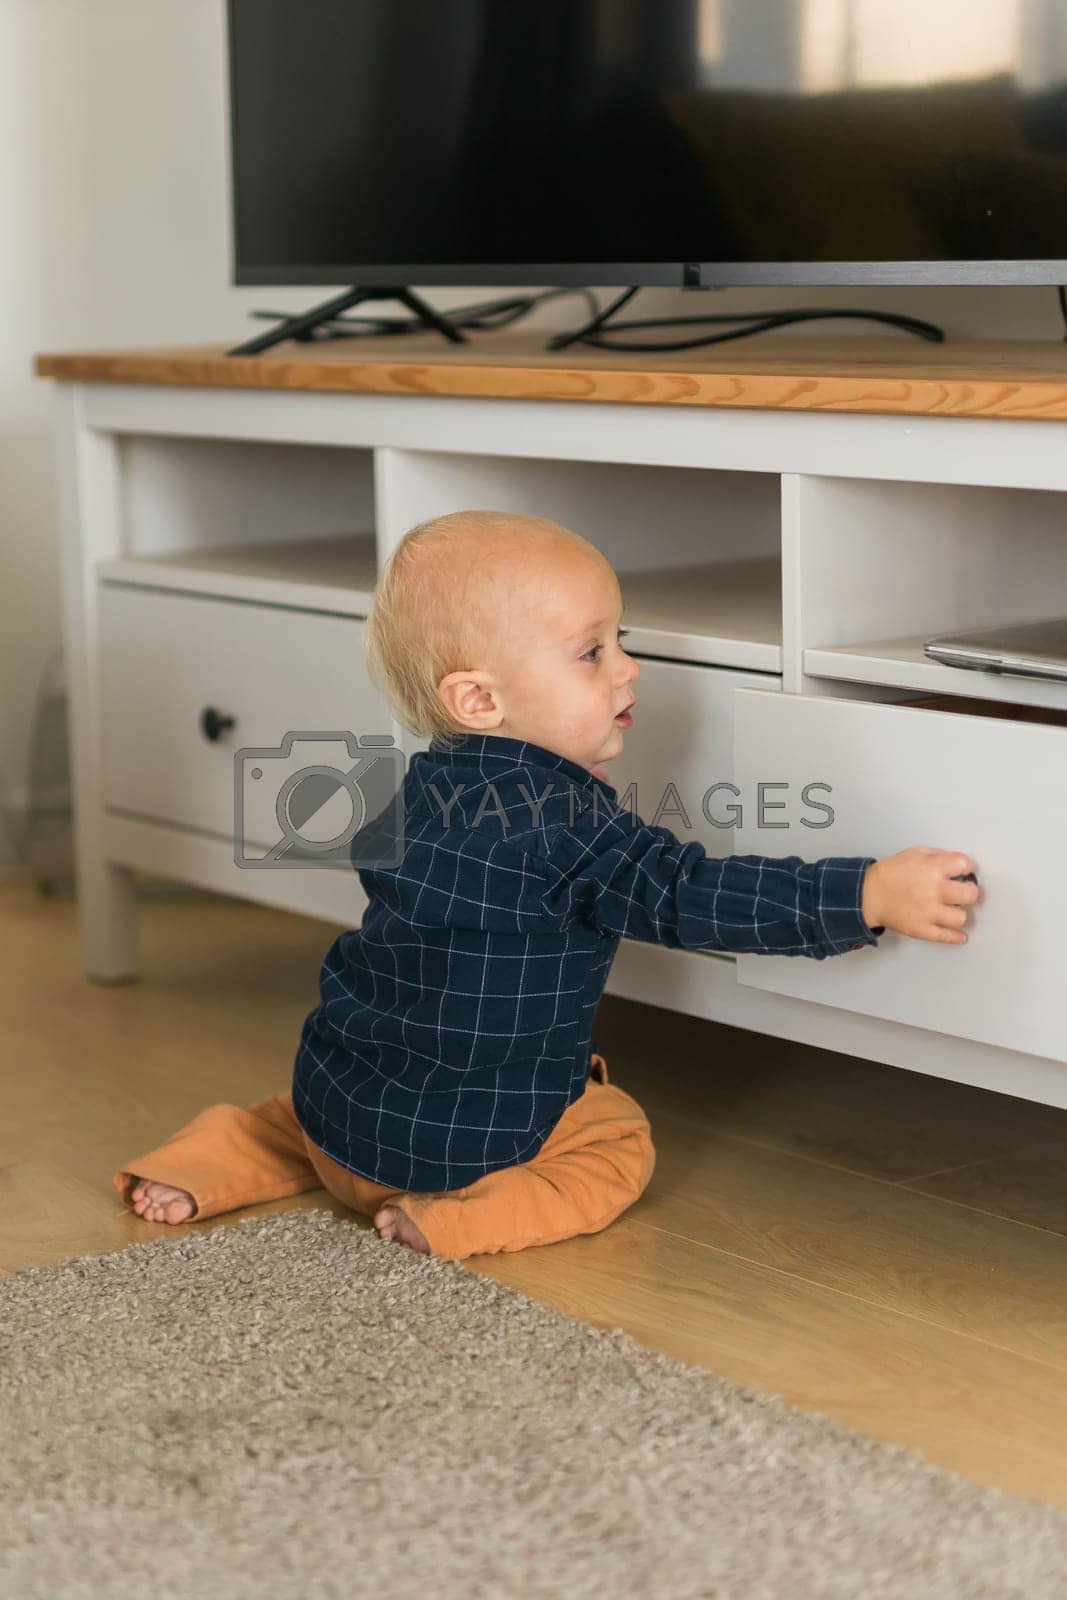 Royalty free image of Toddler baby boy open cabinet drawer with his hand. Child explore what is in cabinet. Baby curiosity and child development stages by Satura86